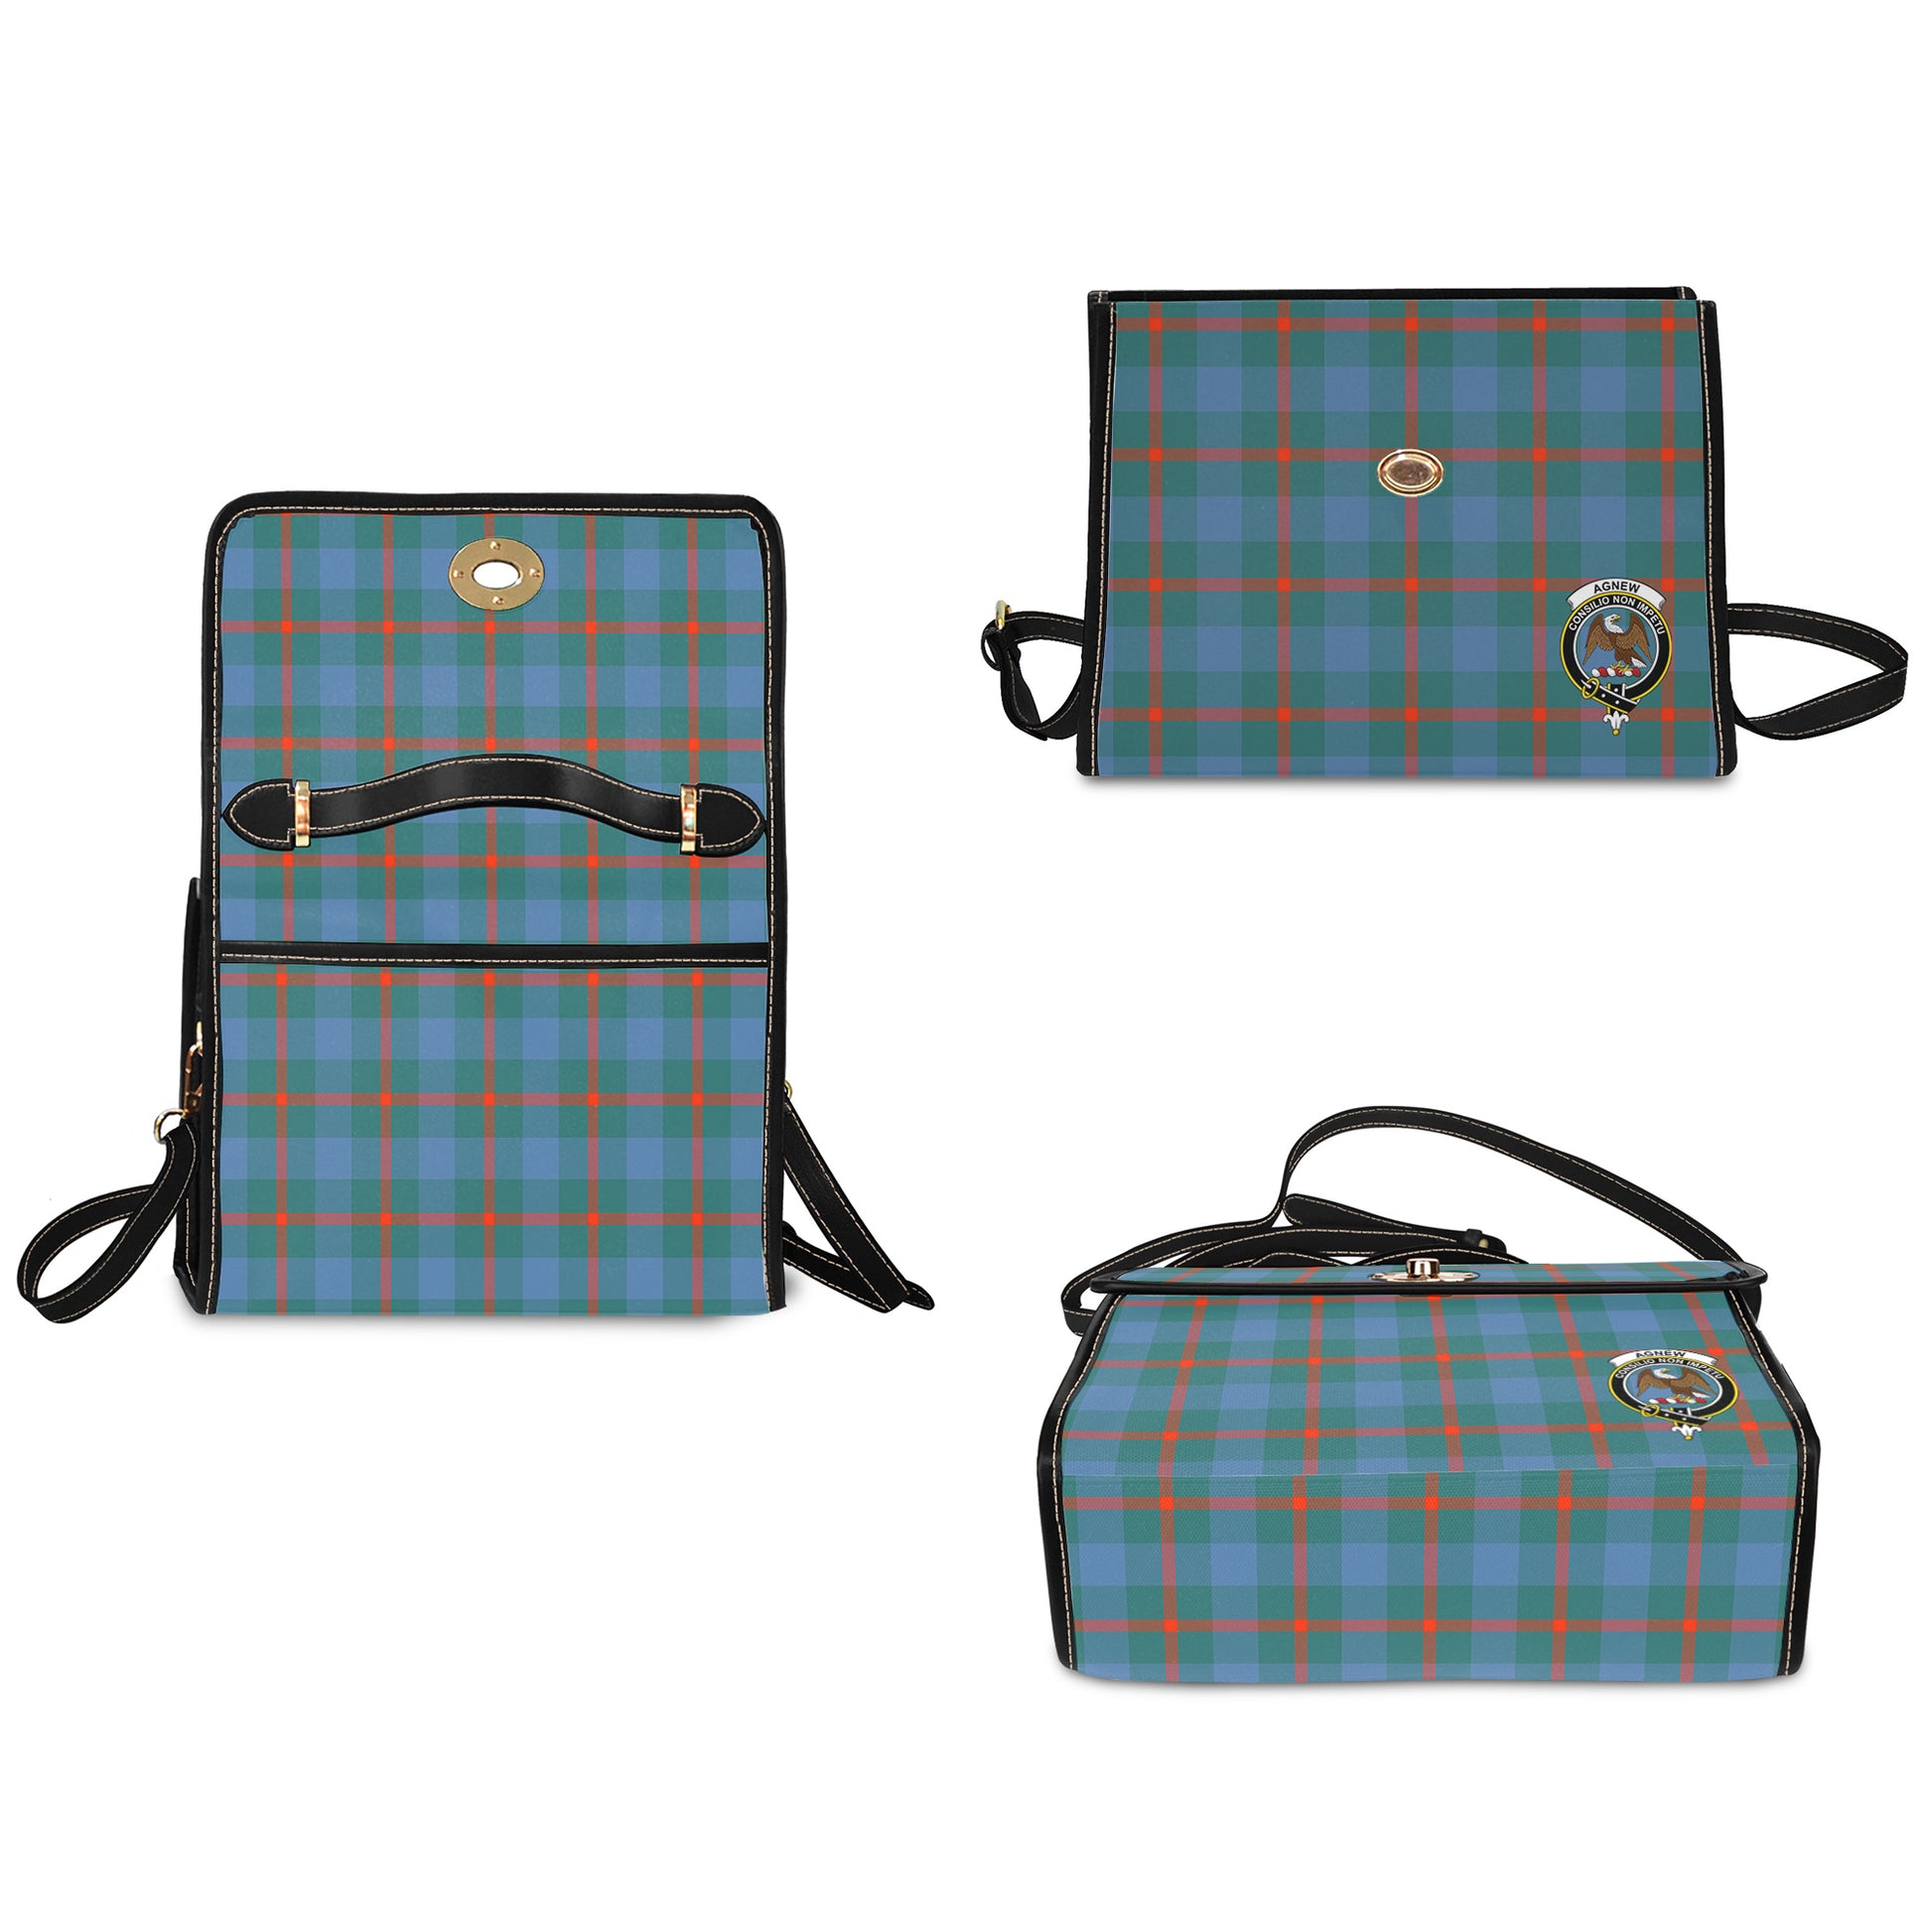 Agnew Ancient Tartan Leather Strap Waterproof Canvas Bag with Family Crest - Tartanvibesclothing